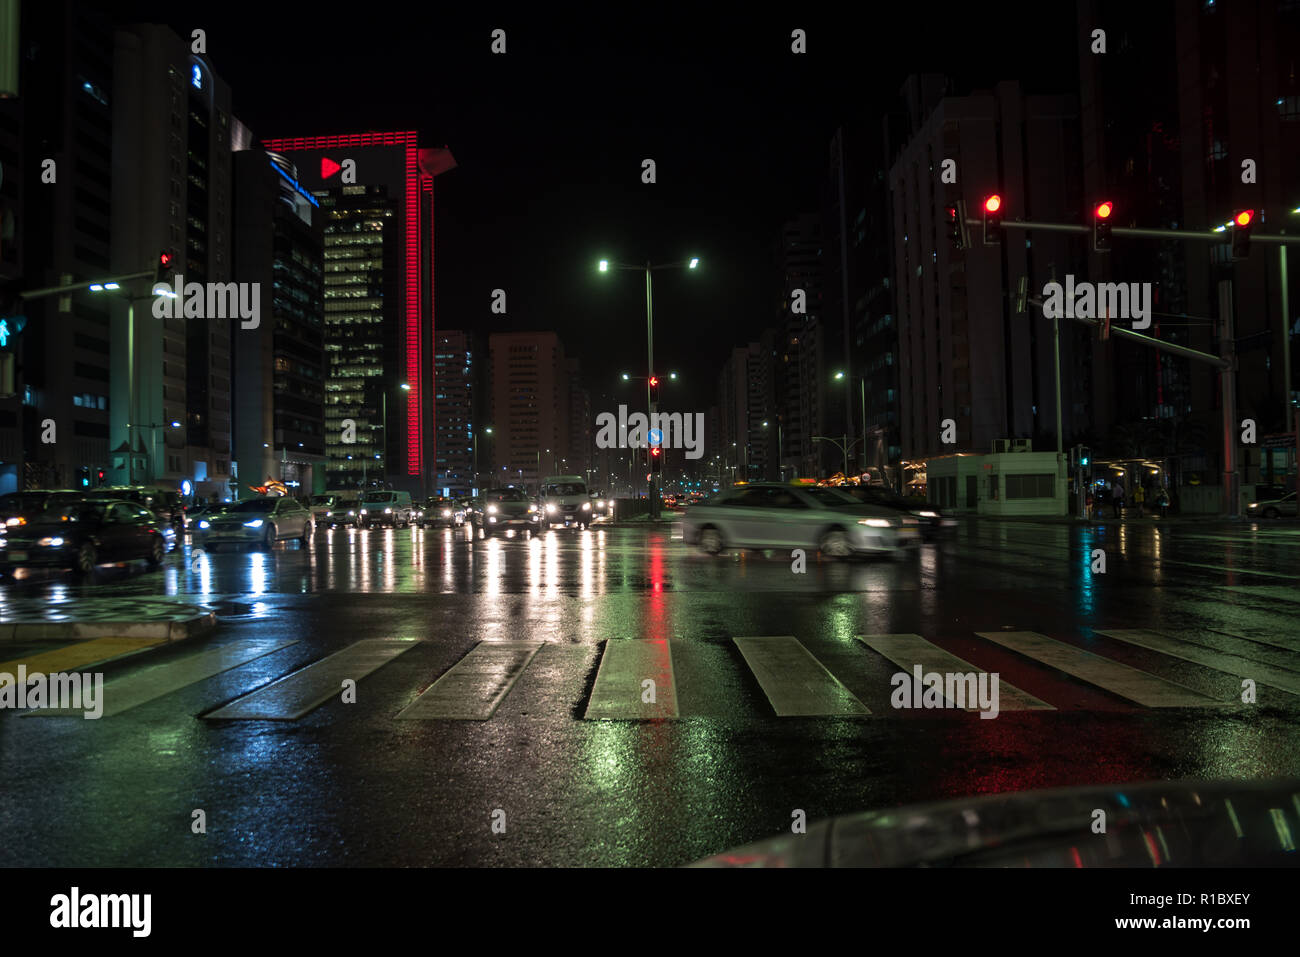 Abu Dhabi, UAE. November 11, 2018: Heavy rain and thunderstorm hit Abu Dhabi and other parts of the UAE in the evening. Abu Dhabi Police also warned residents and motorists to stay indoors due to the bad weather. Credit: Fahd Khan / Alamy Live News Stock Photo